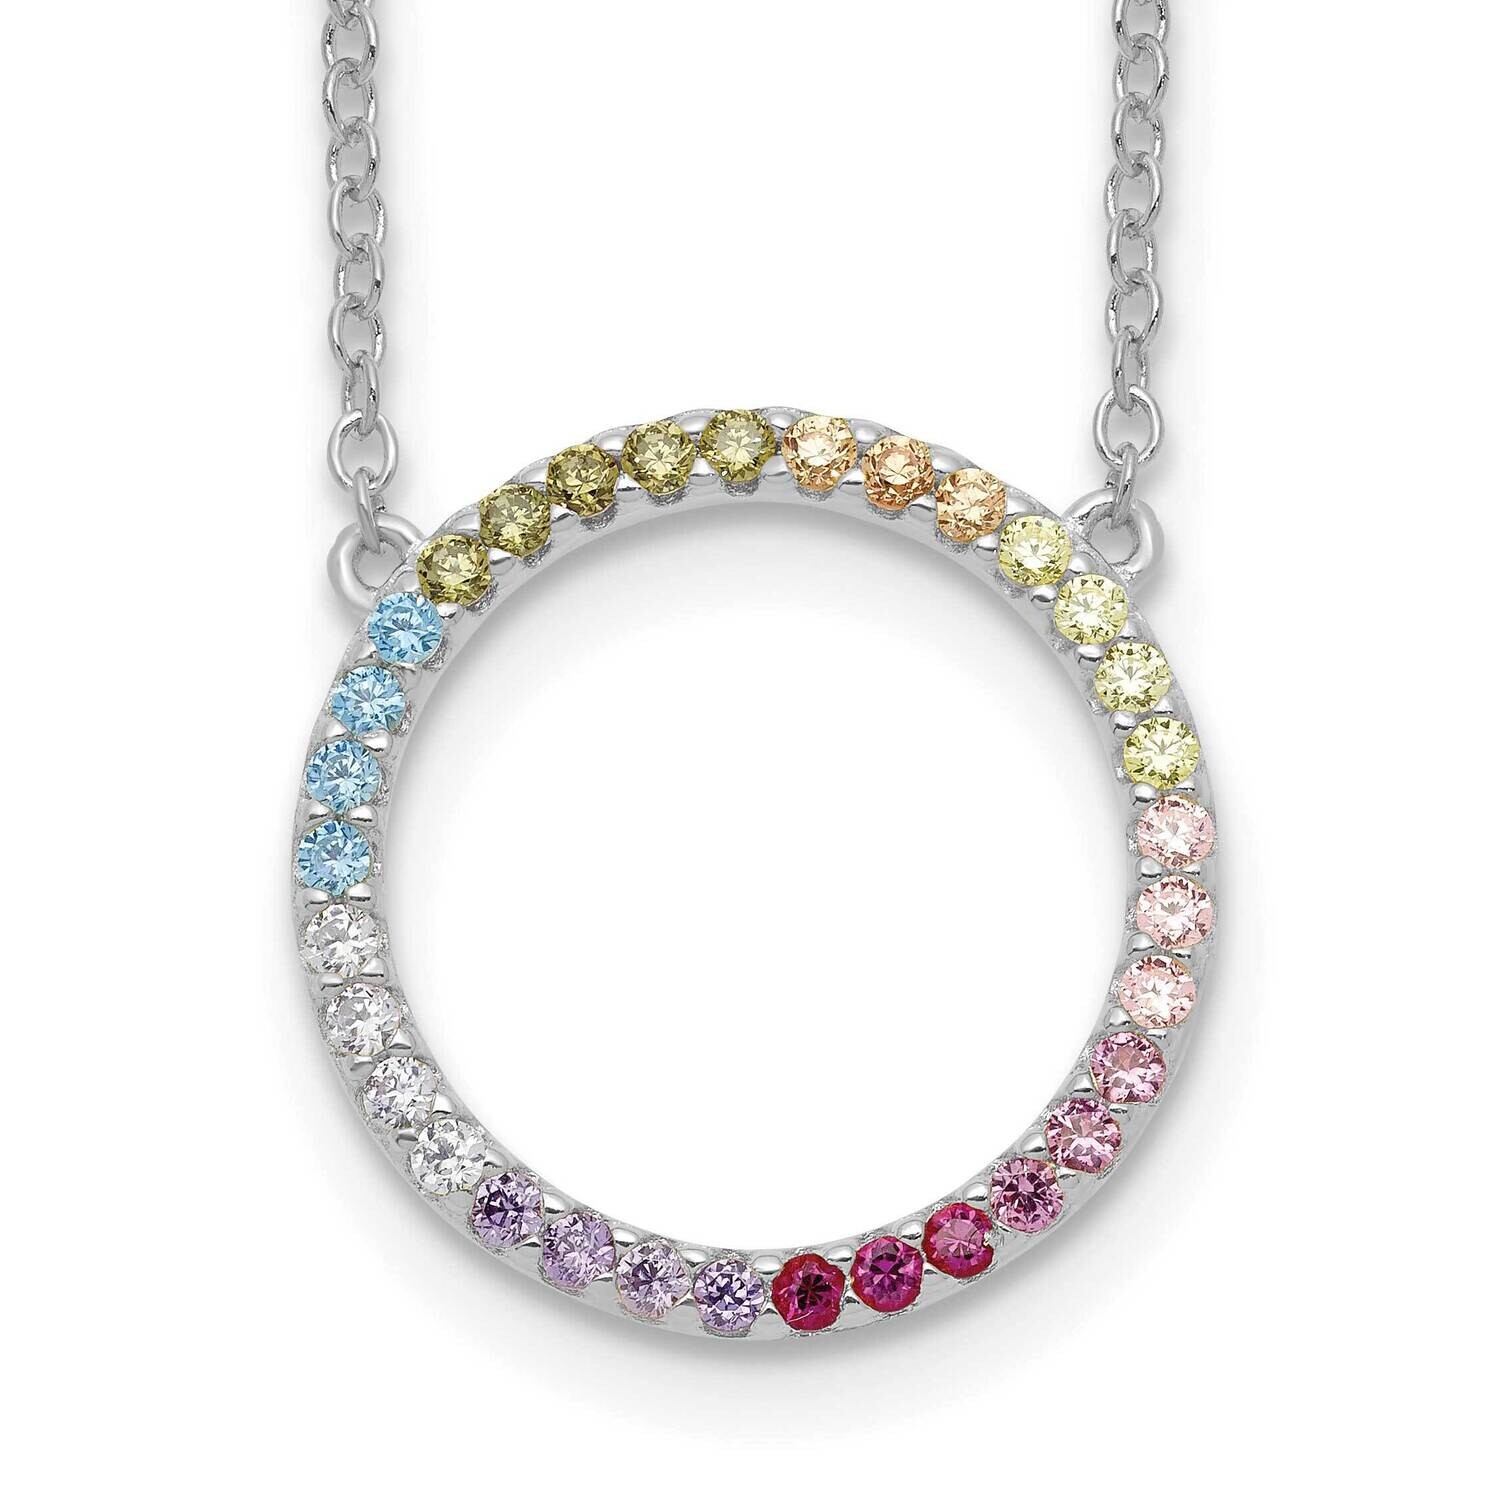 Prizma 16 Inch Colorful CZ Open Circle Necklace 2 Inch Extender Sterling Silver Rhodium-Plated QG5663-16